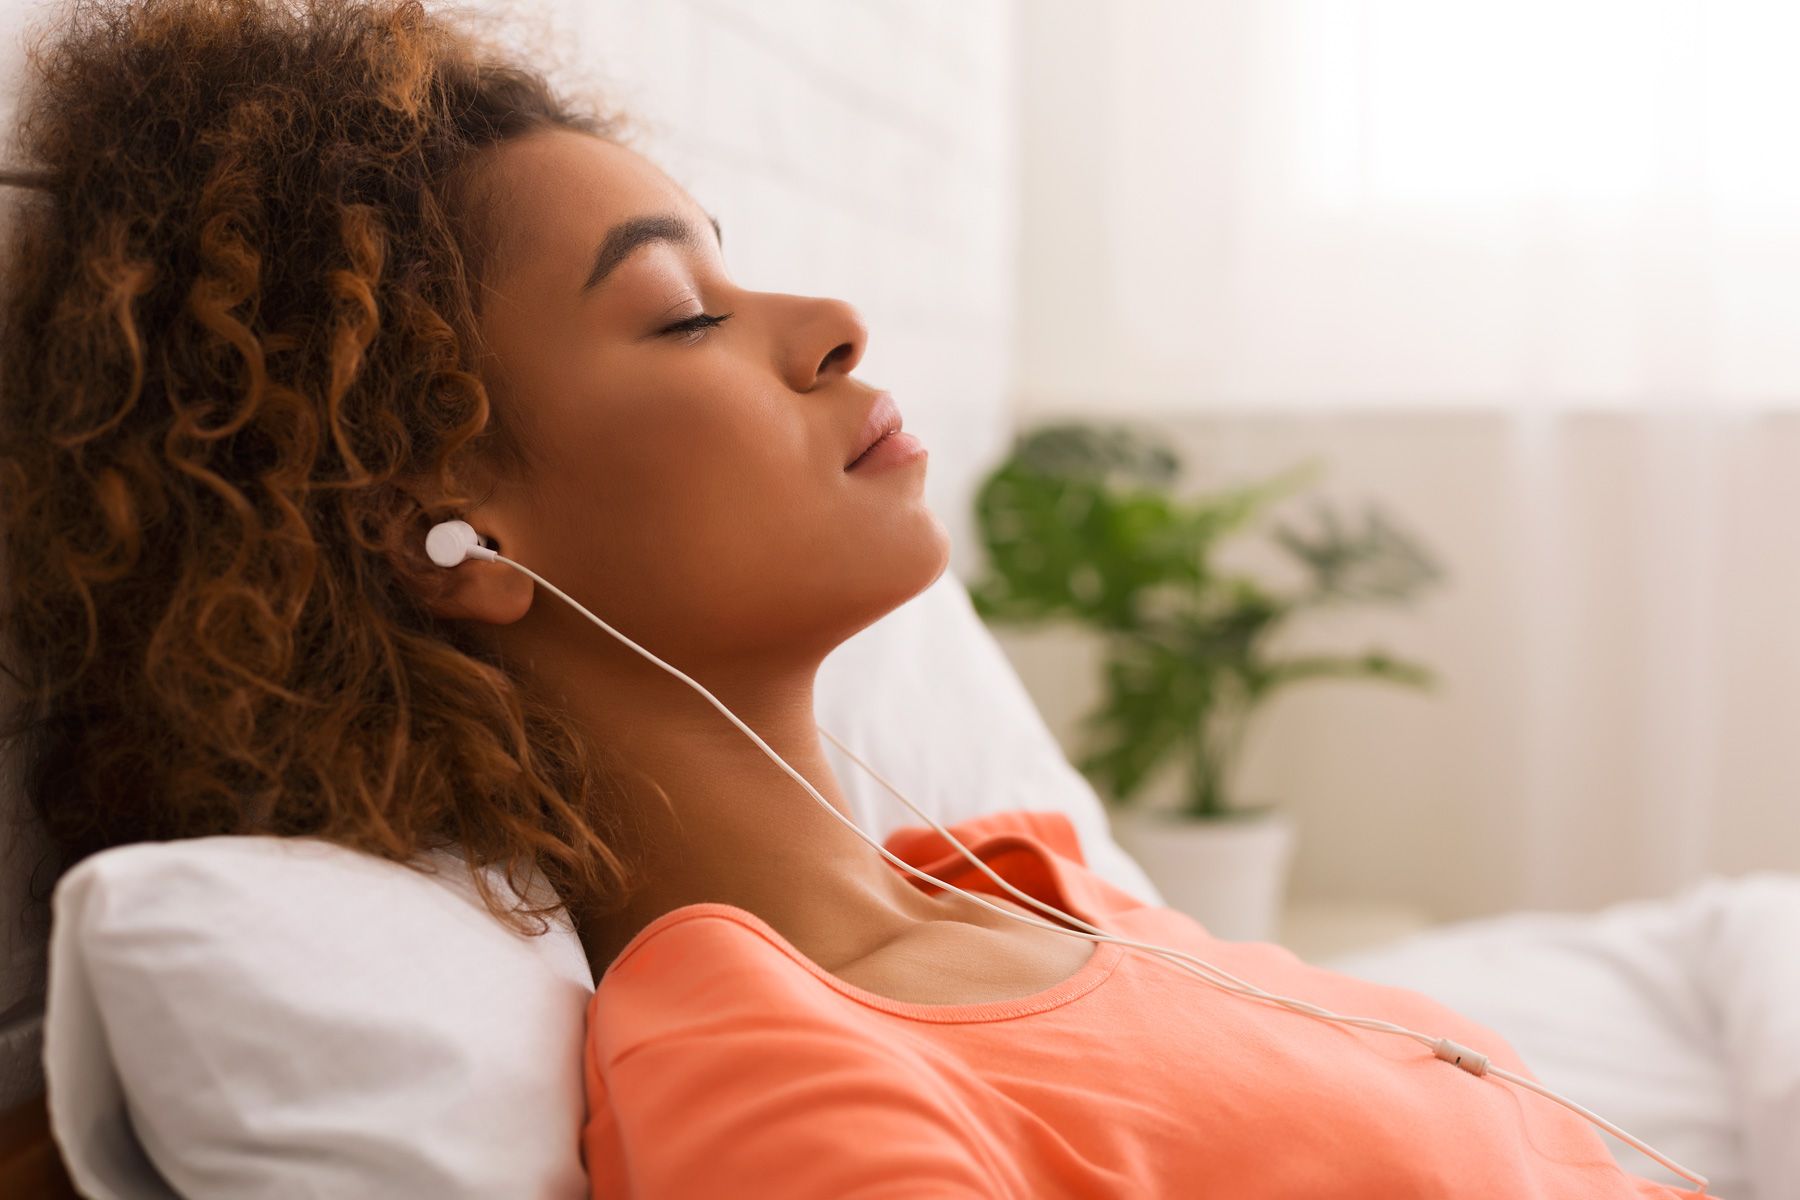 photo of woman listening to music